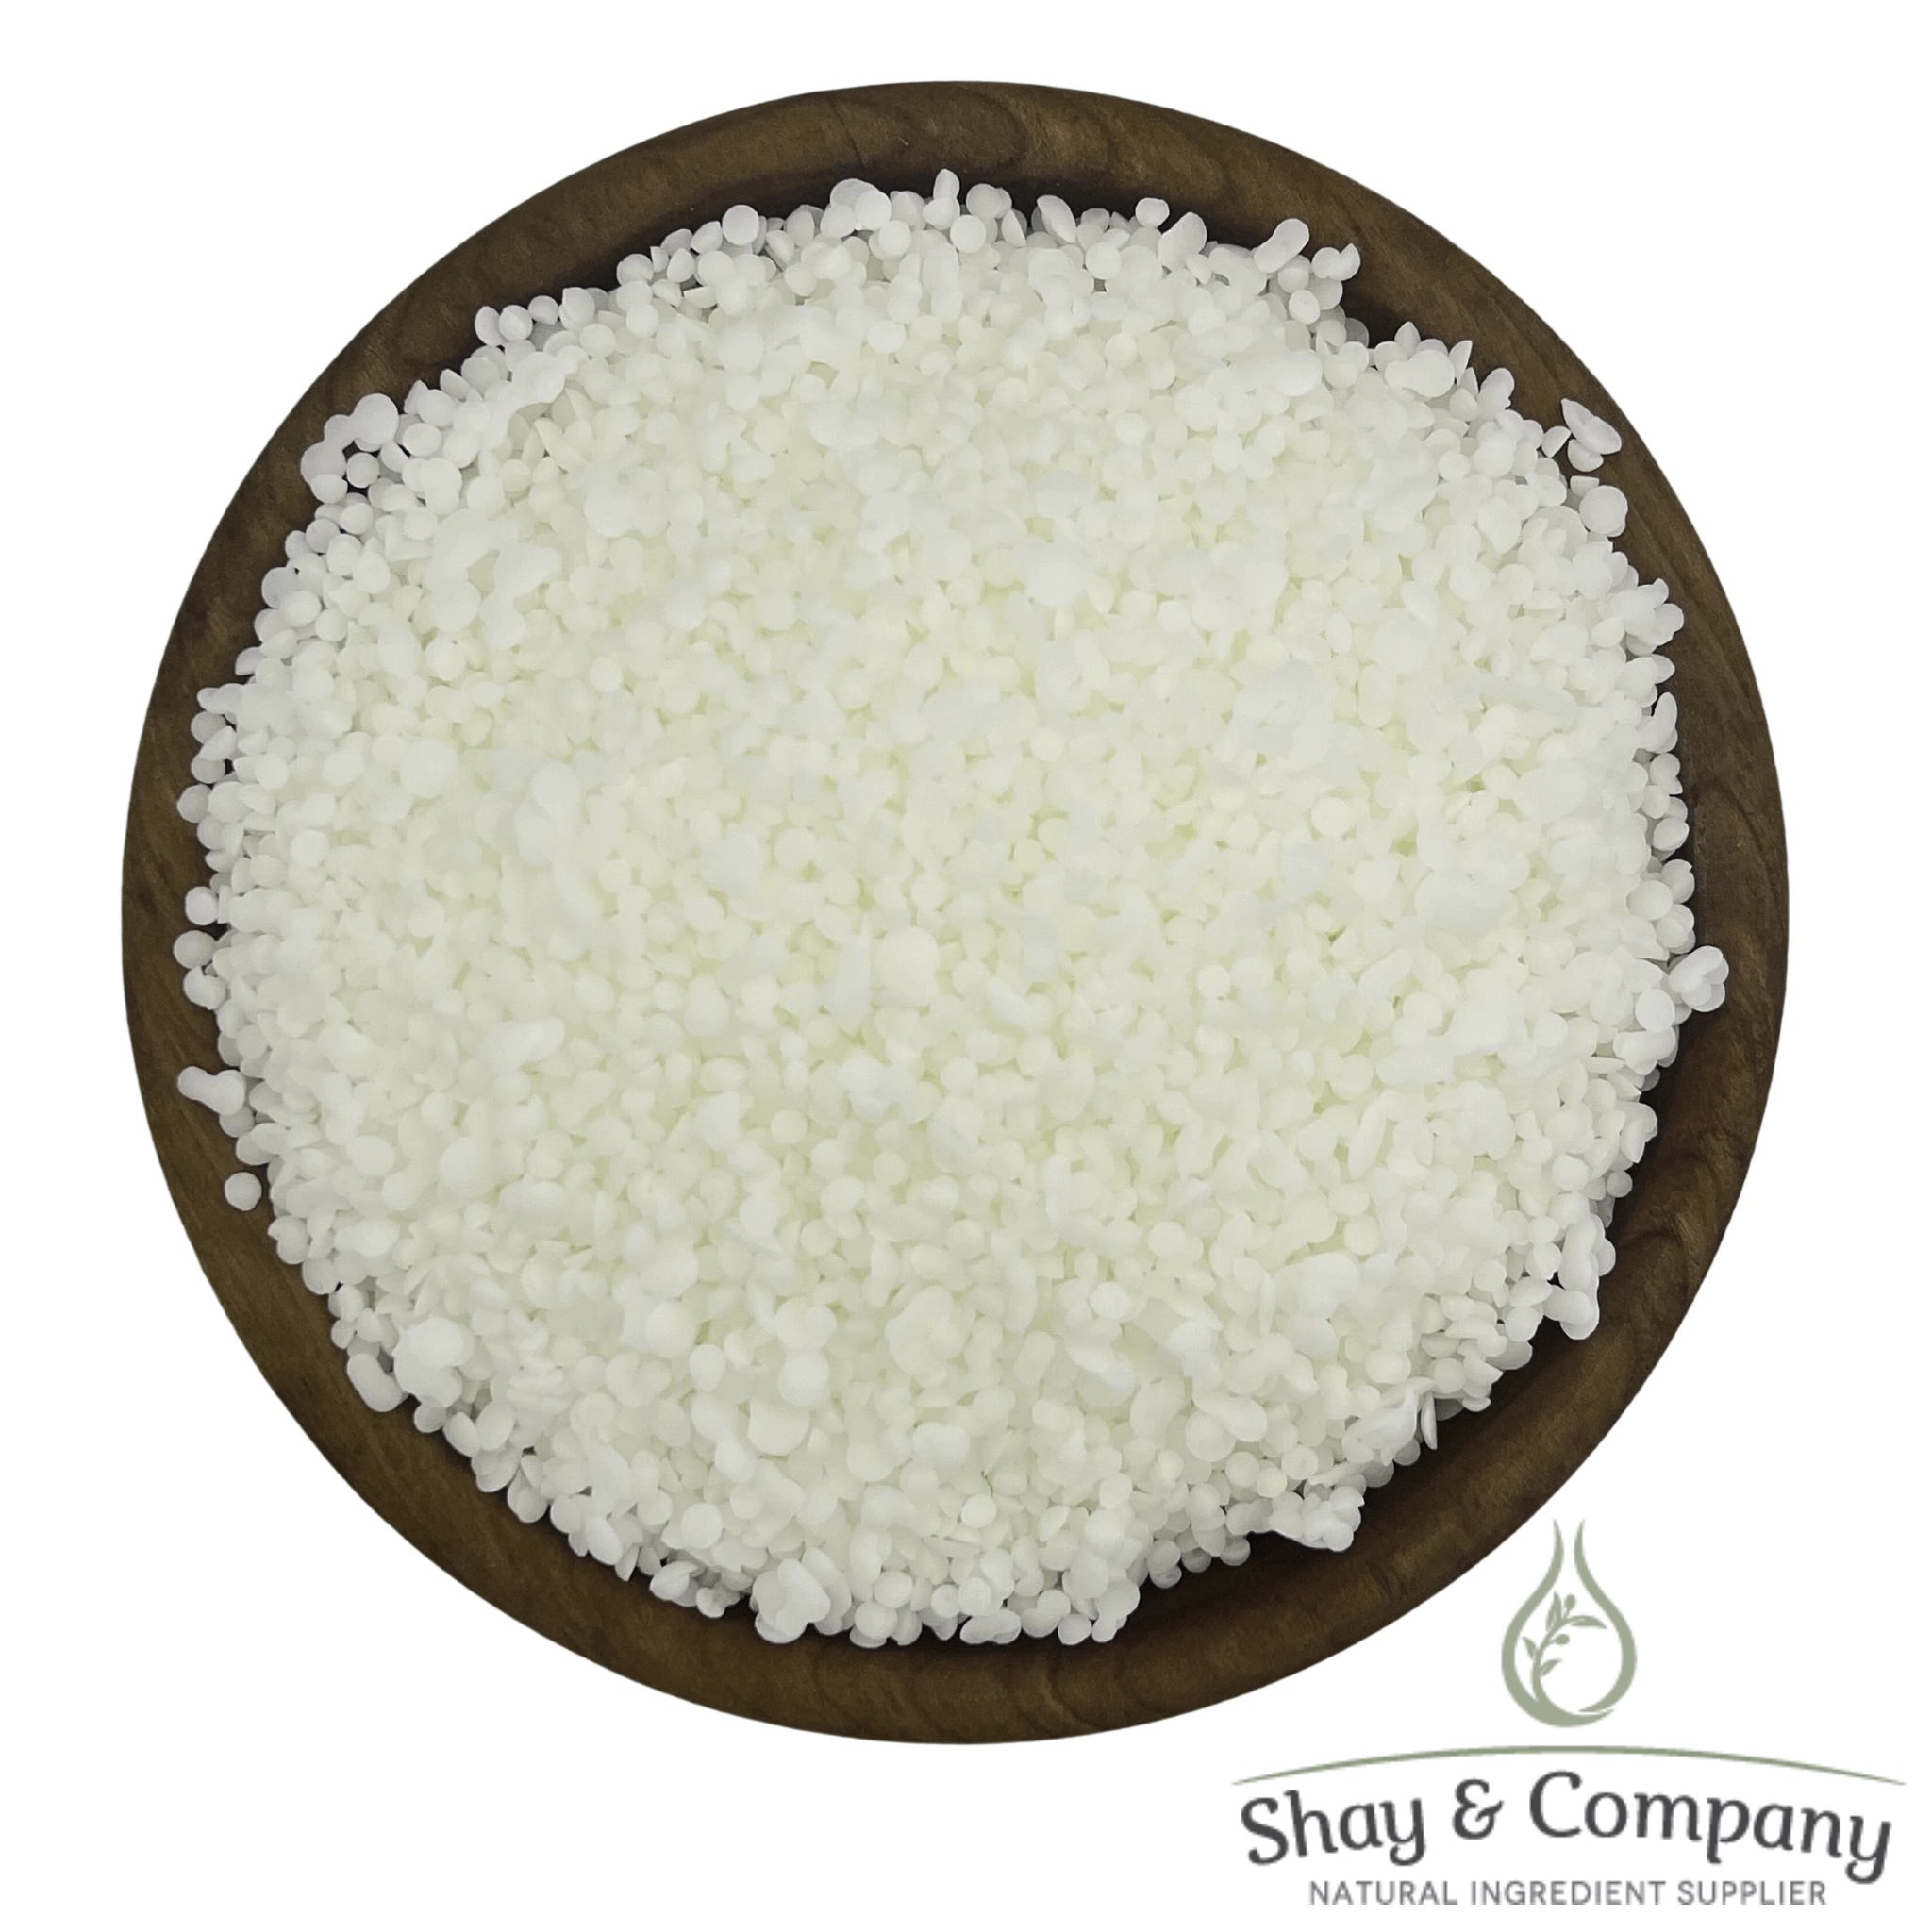 Emulsifying wax granules and other natural oils @ wholesale price